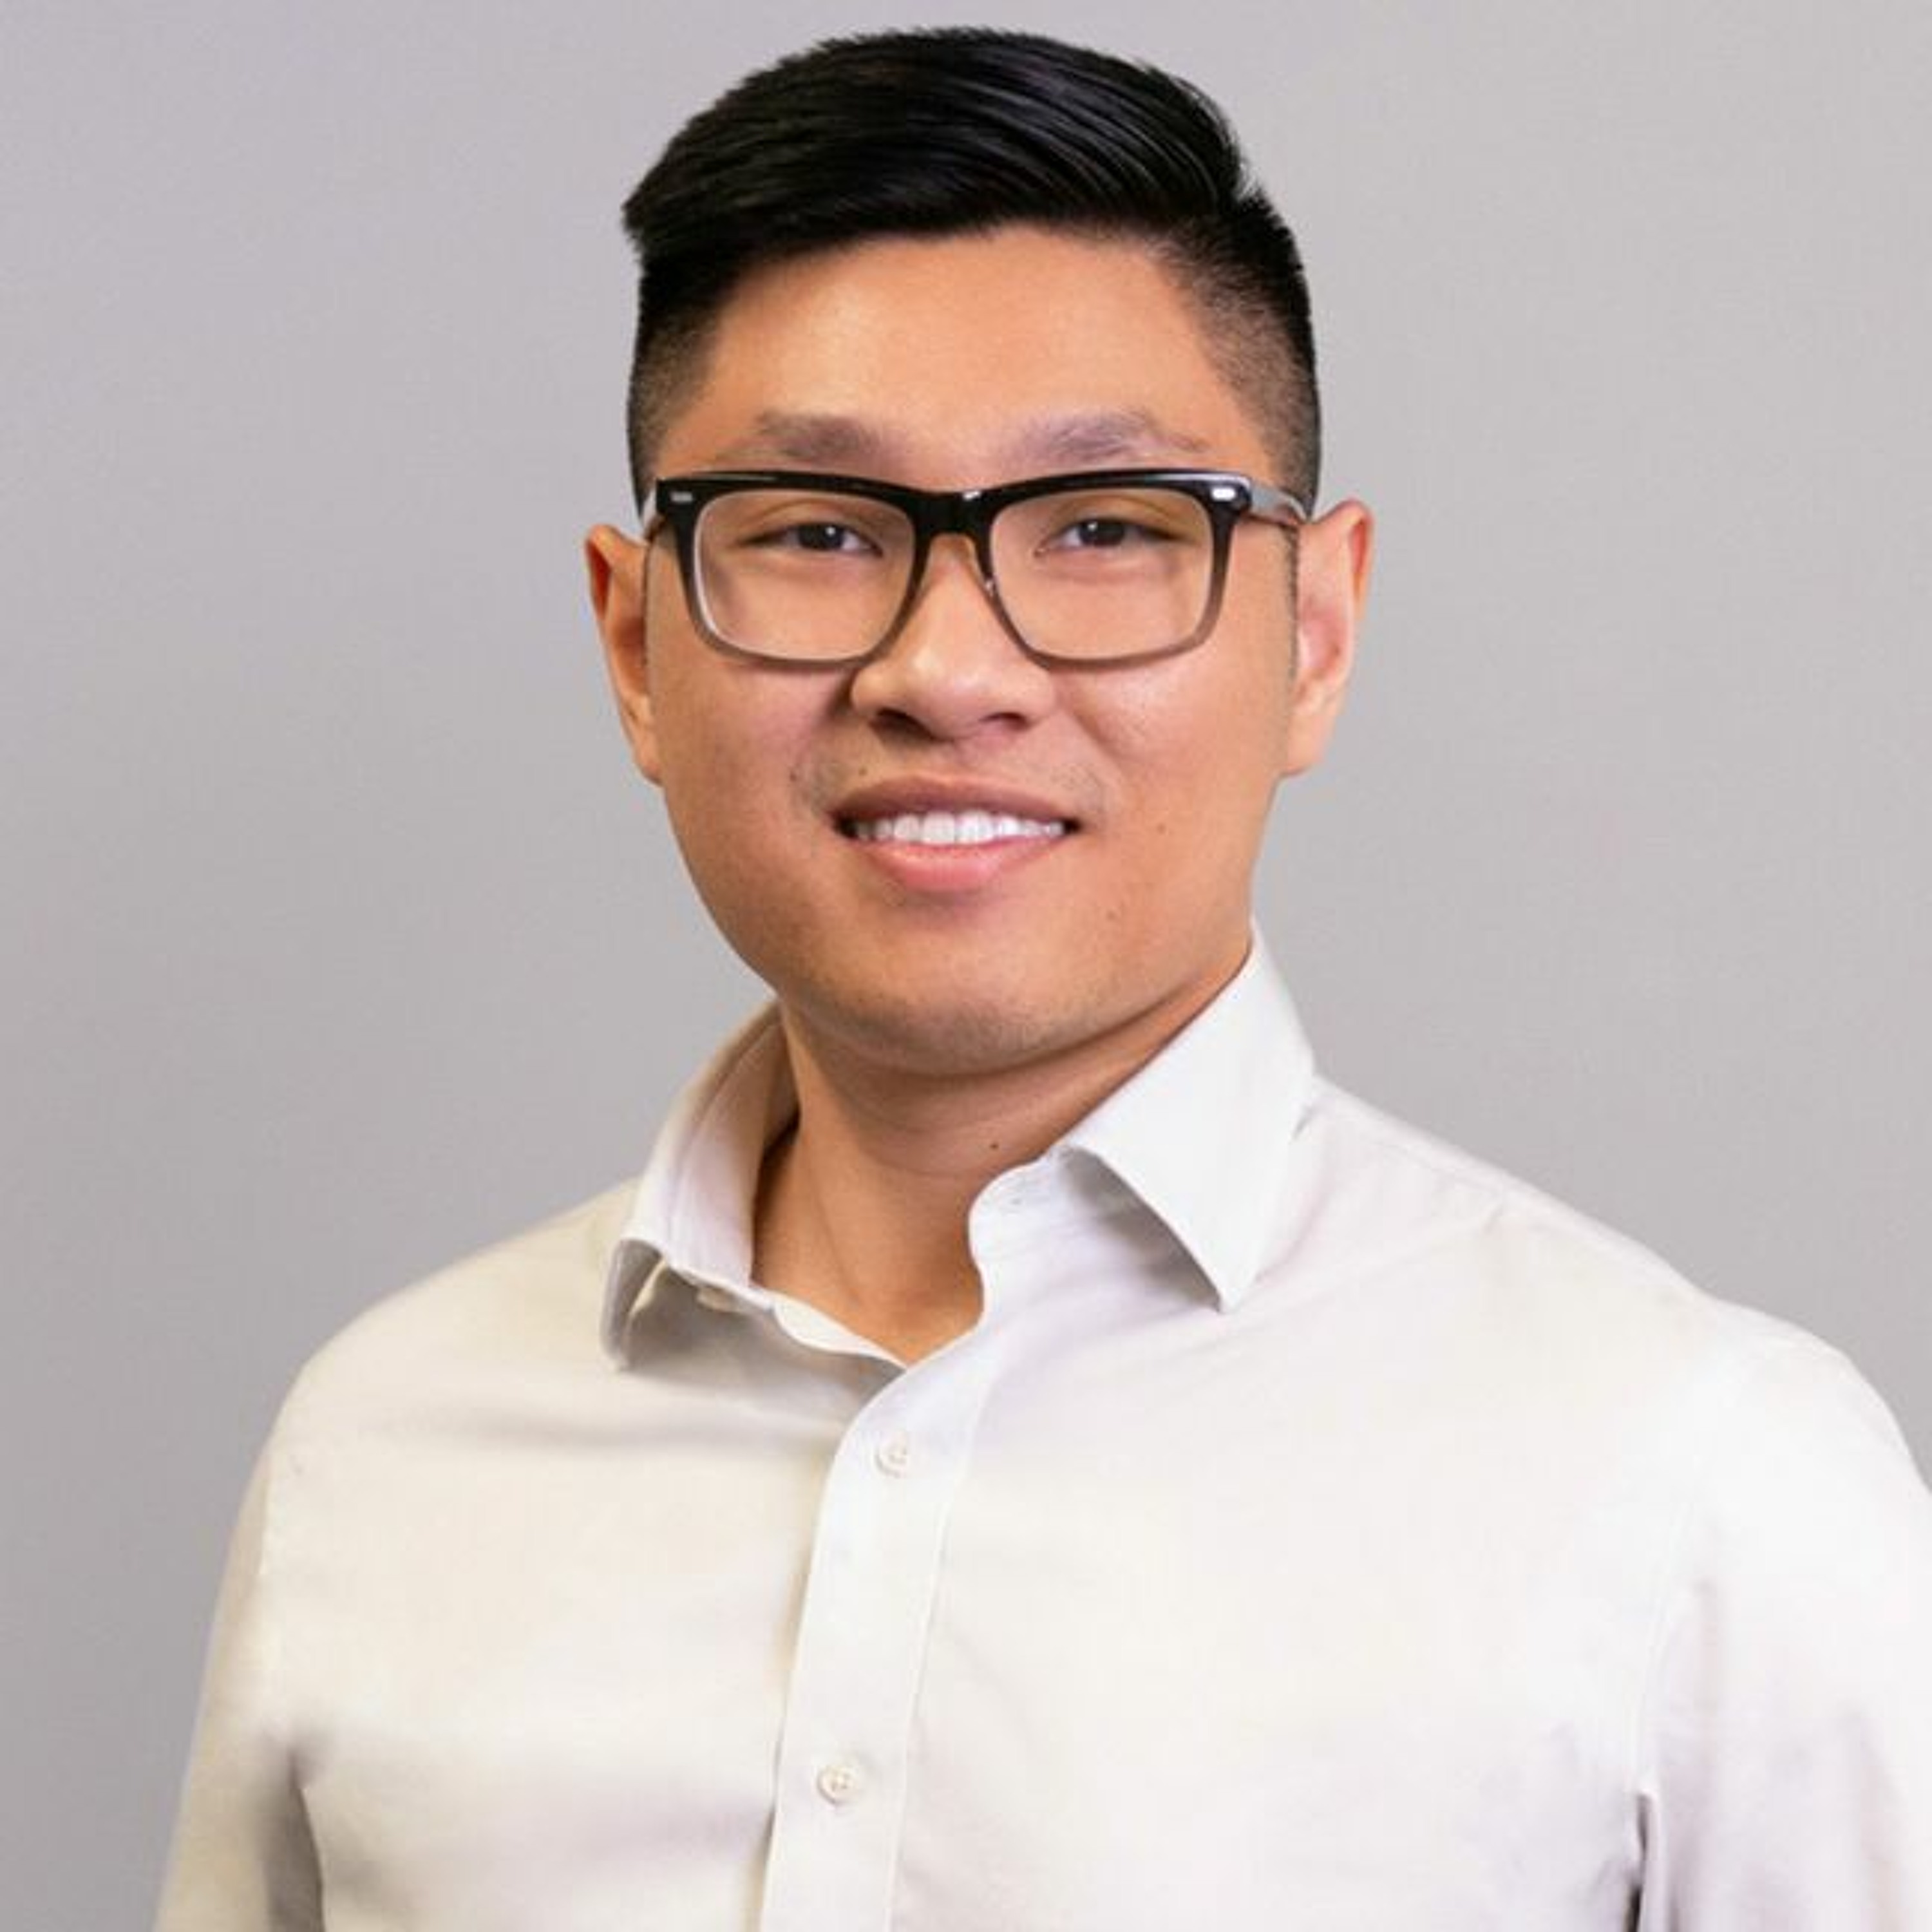 Co-Founder of Annalise.ai Aengus Tran on Using AI as a Spell Check for Health Checks - Ep. 207